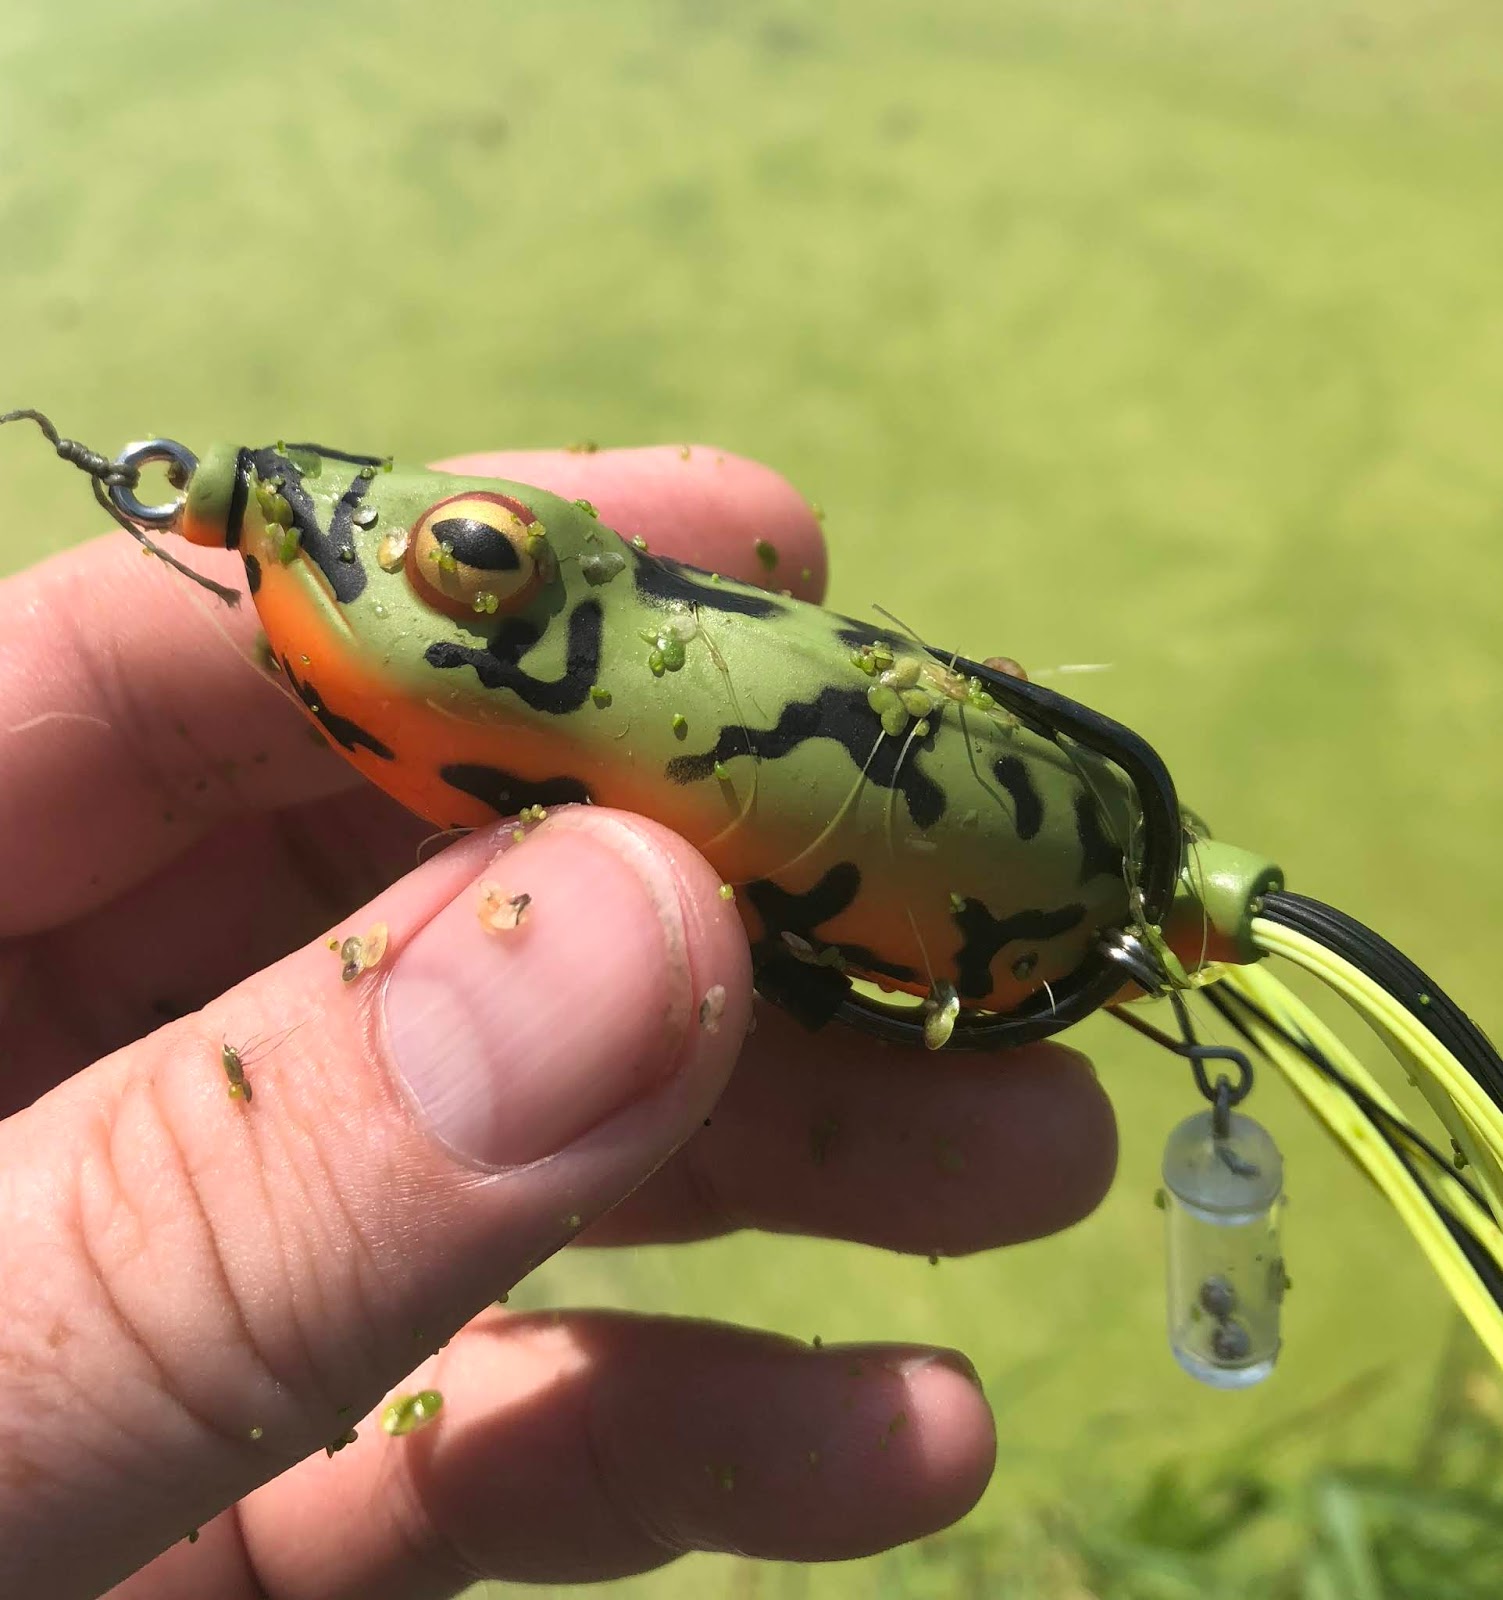 Bass Junkies Frog Pond: Yum Tip Toad Review